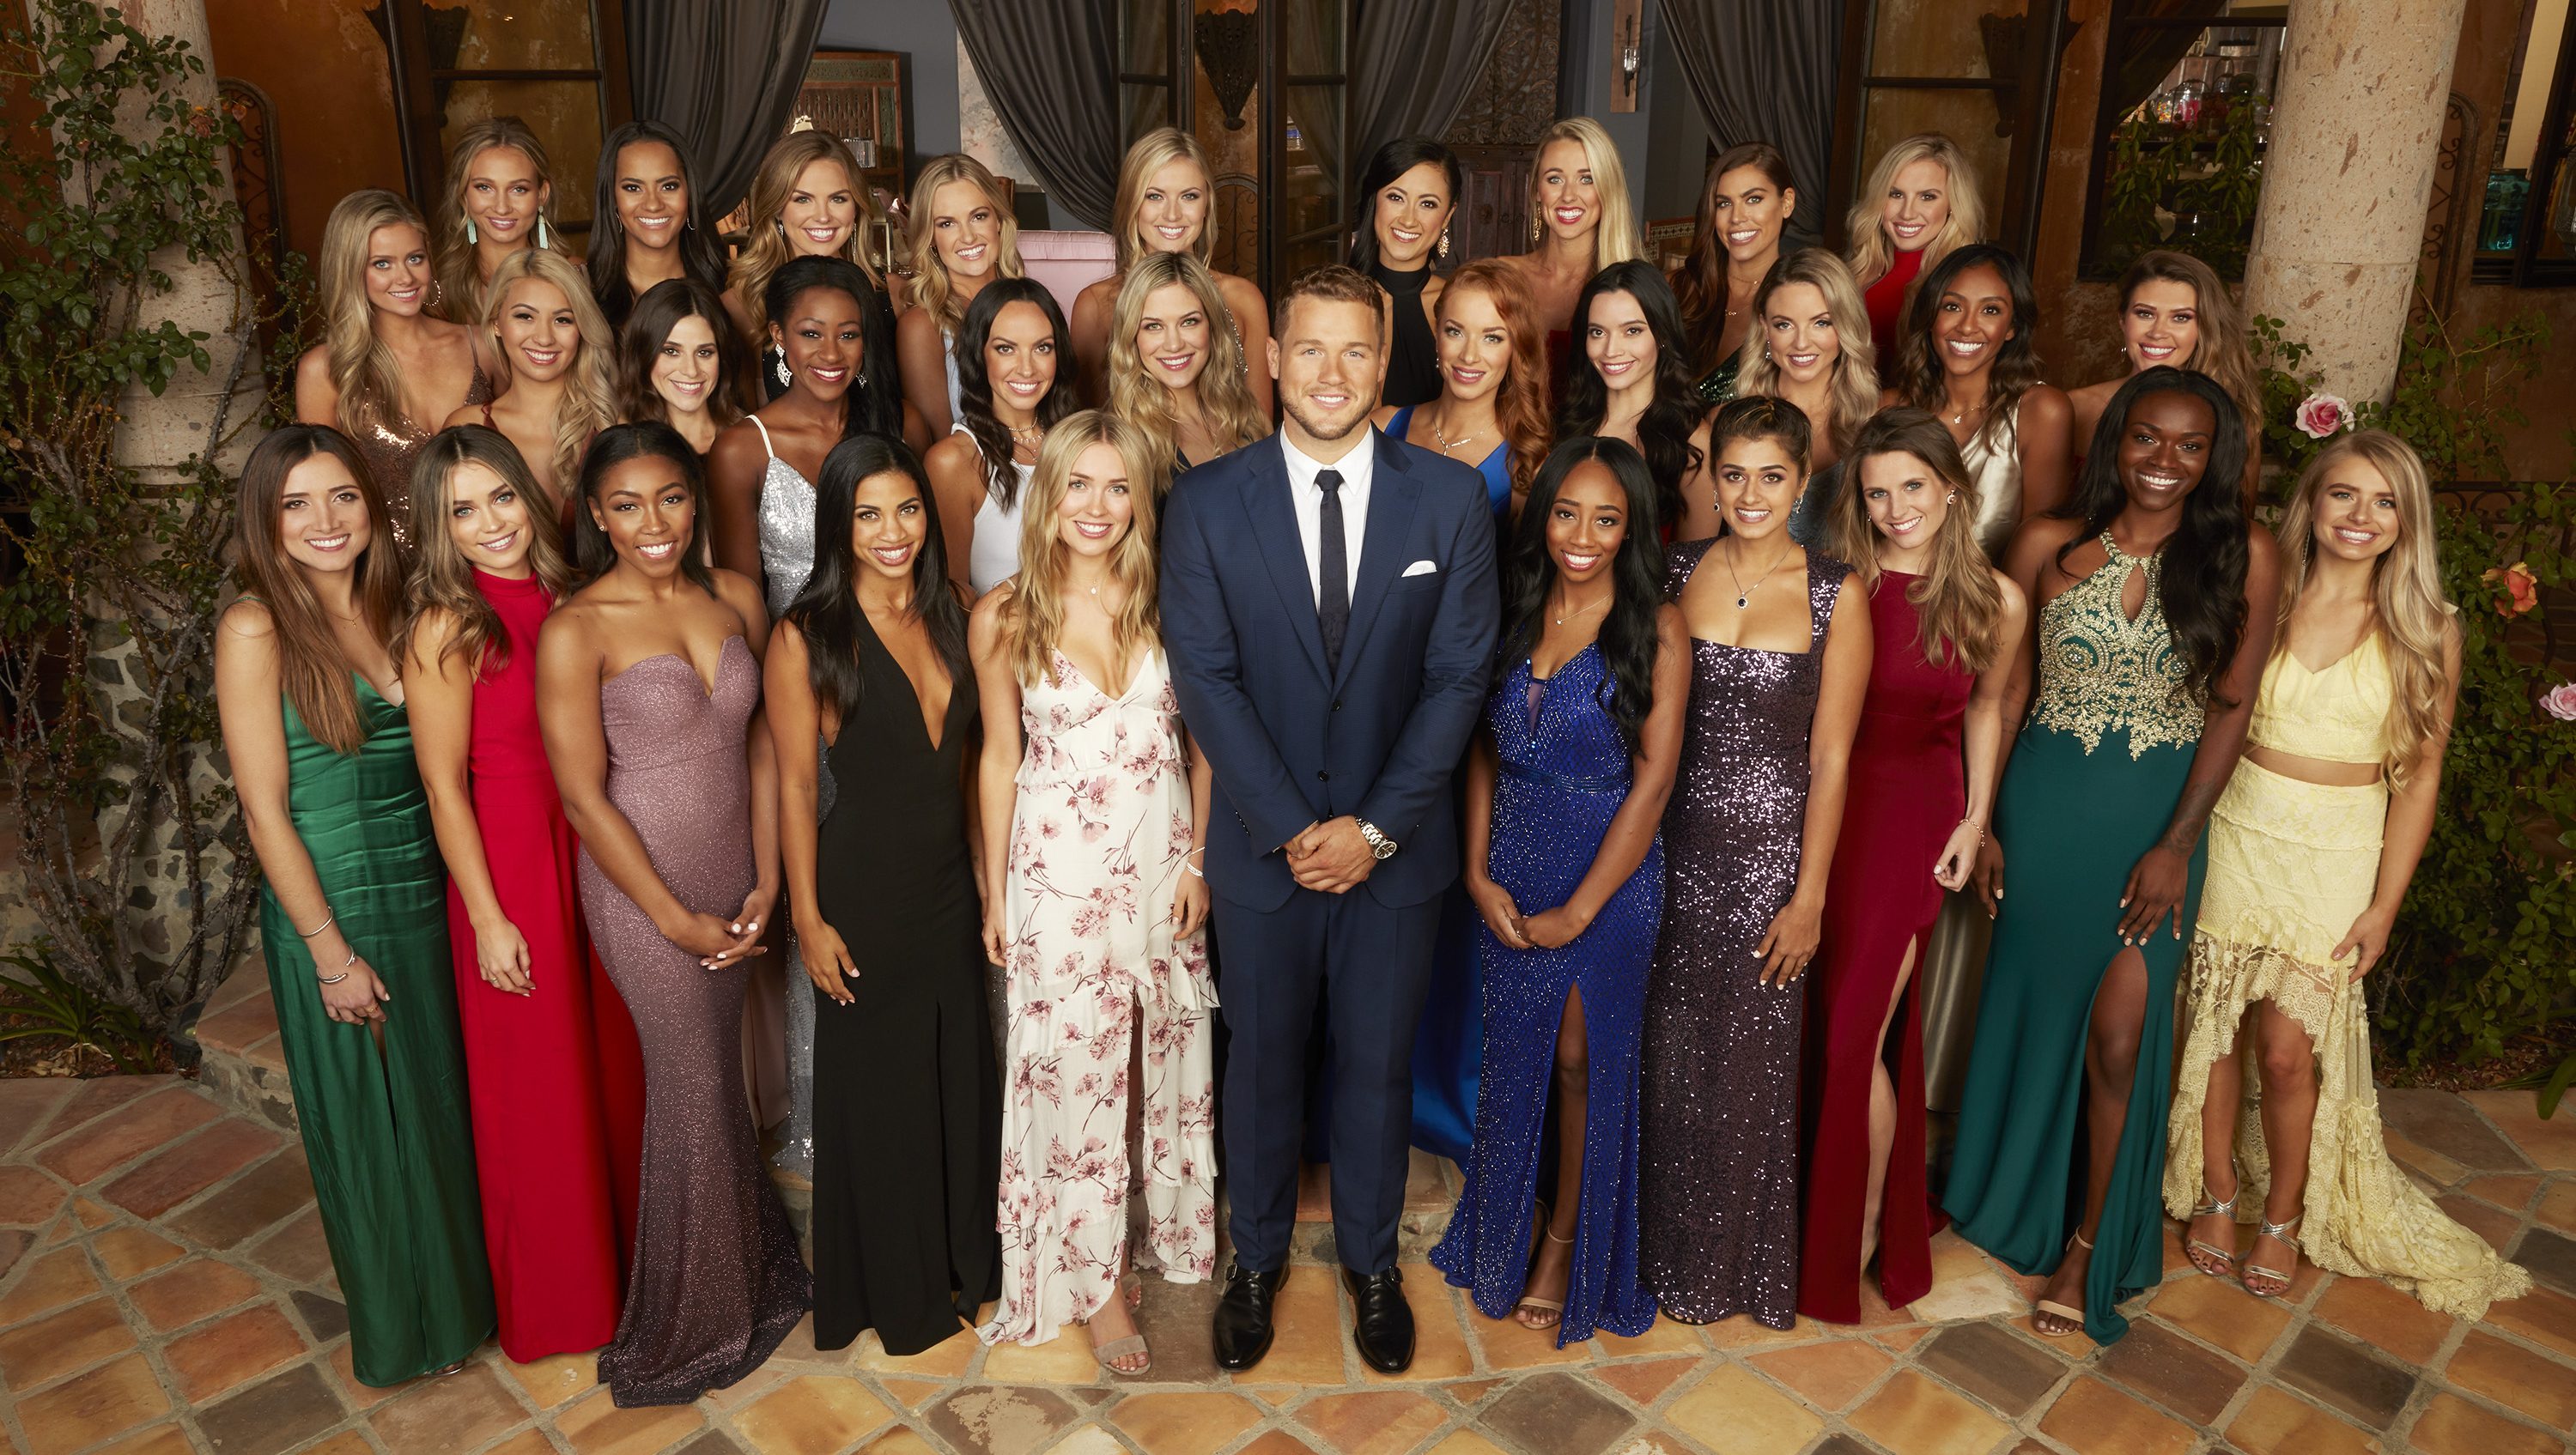 Katie Morton on ‘The Bachelor’ 5 Fast Facts You Need to Know